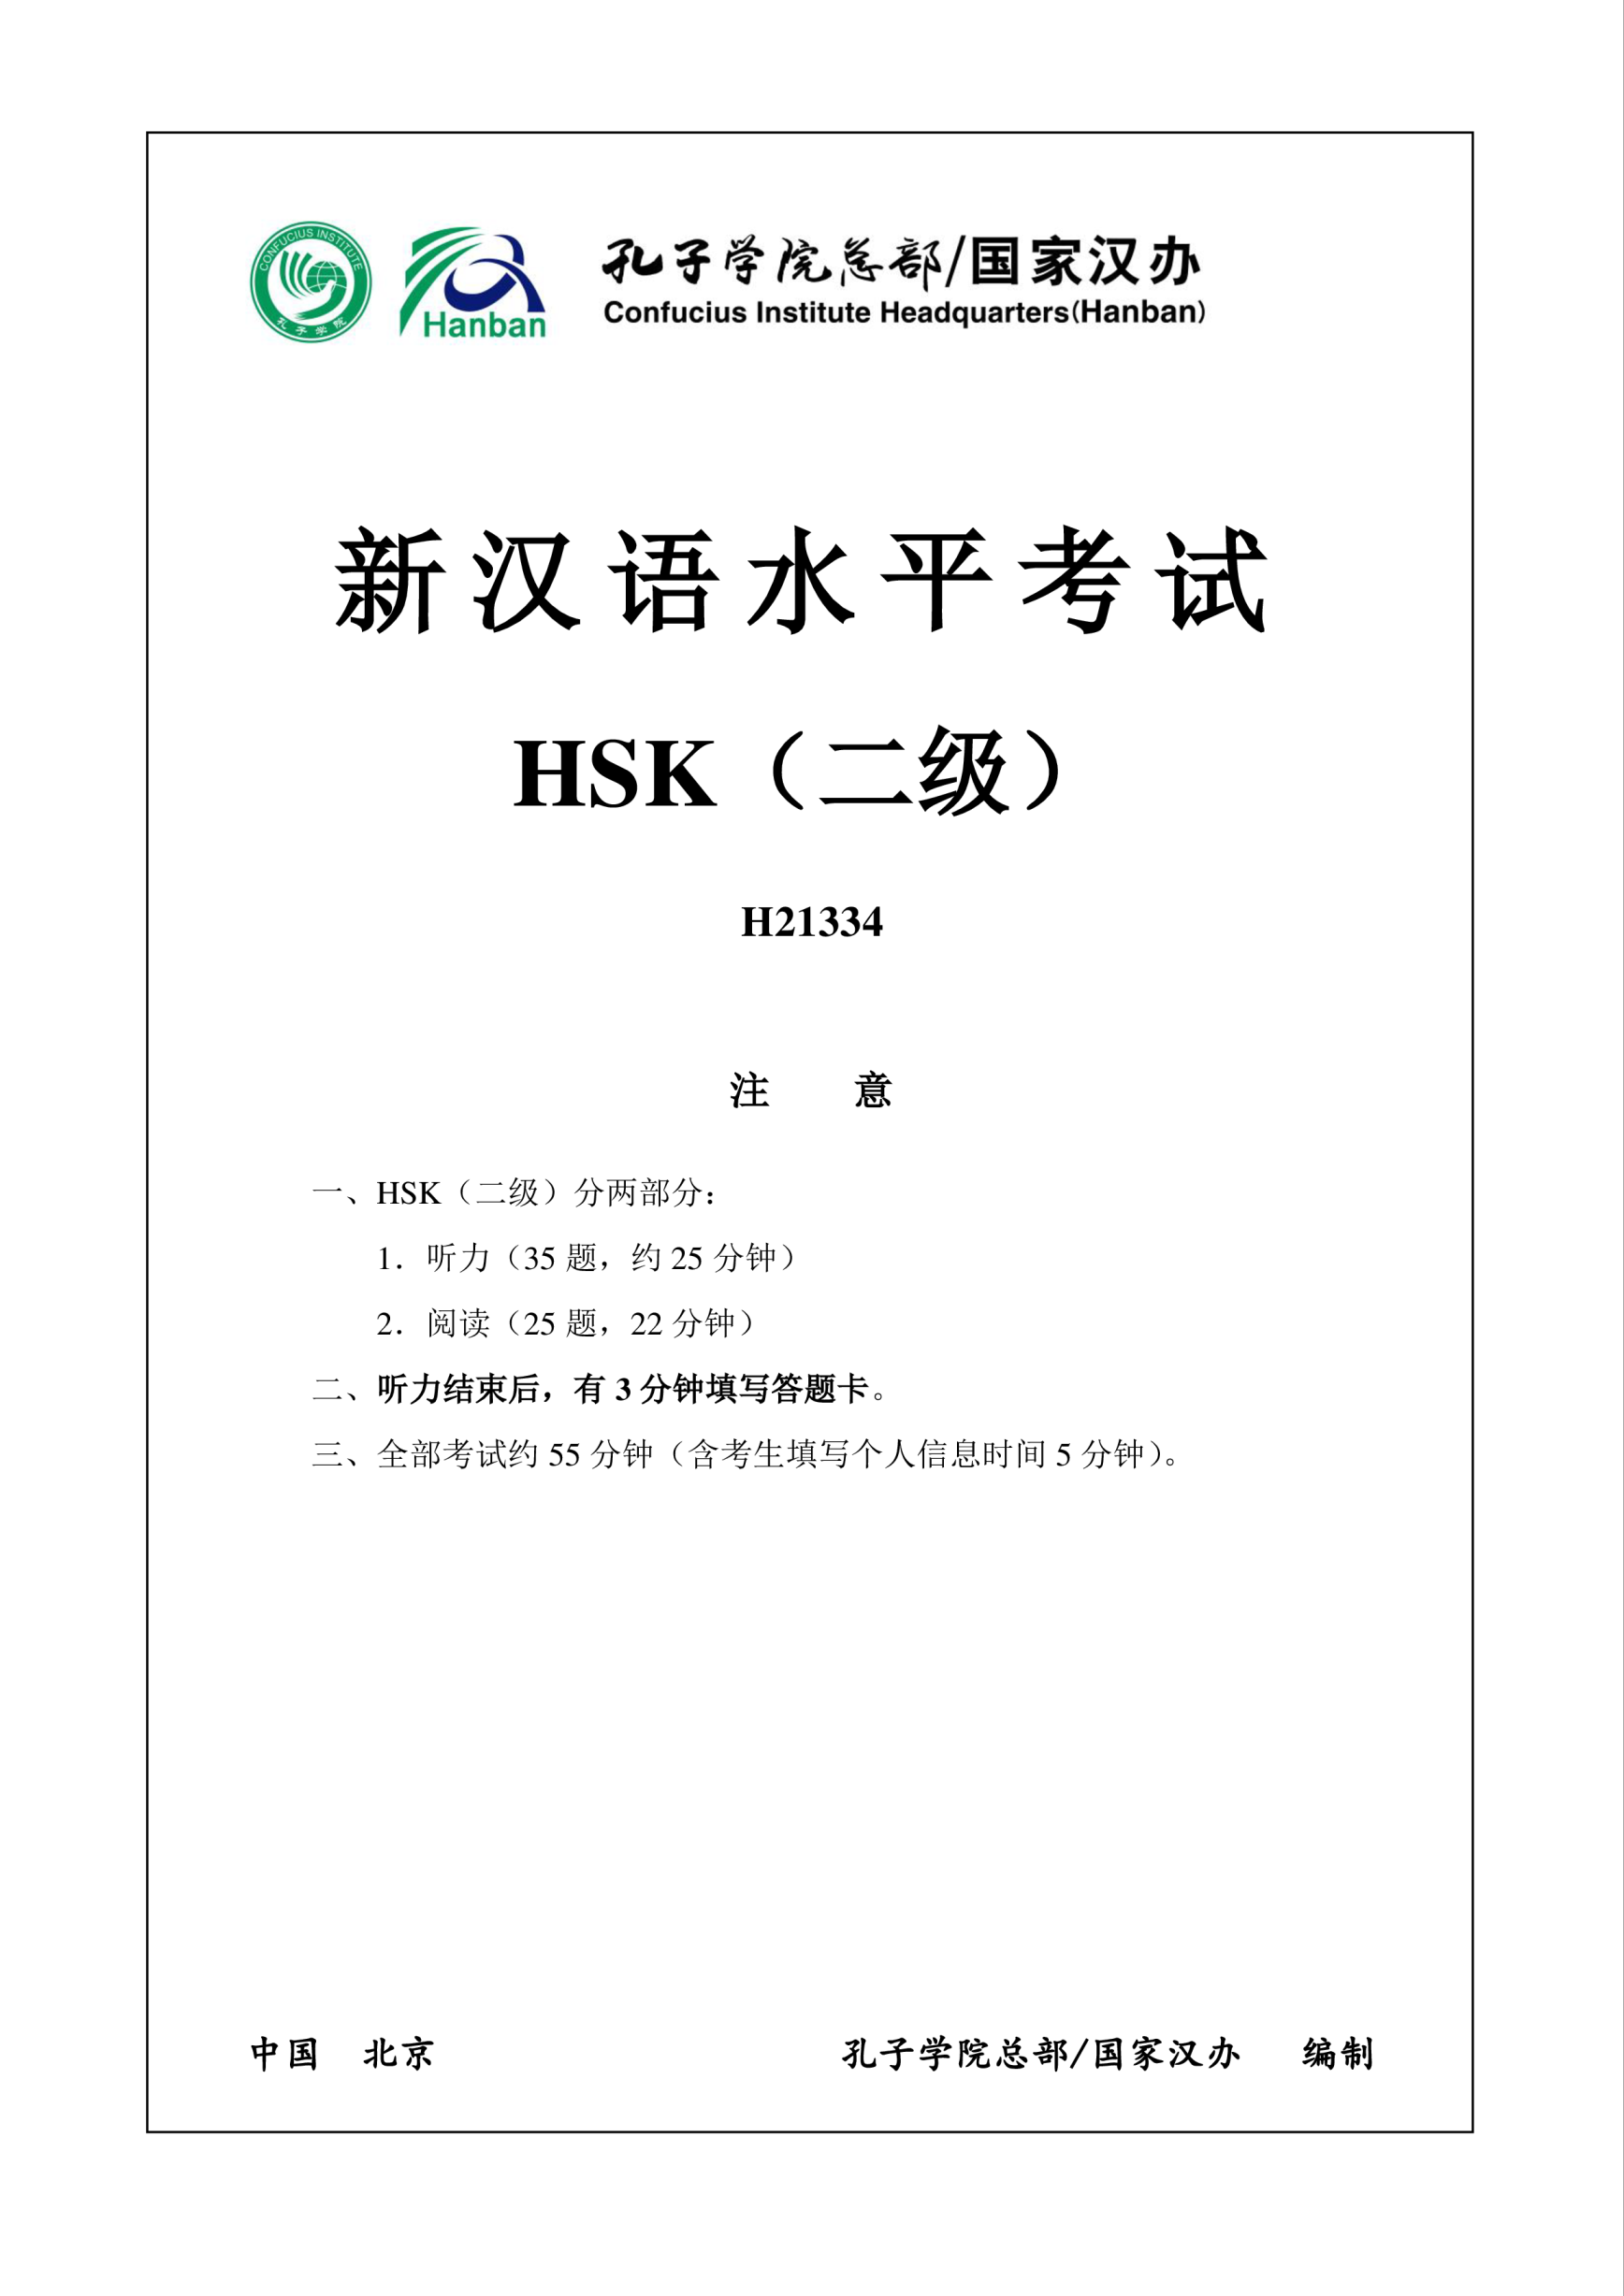 template preview imageHSK2 Chinese Exam including Answers # HSK2 H21334